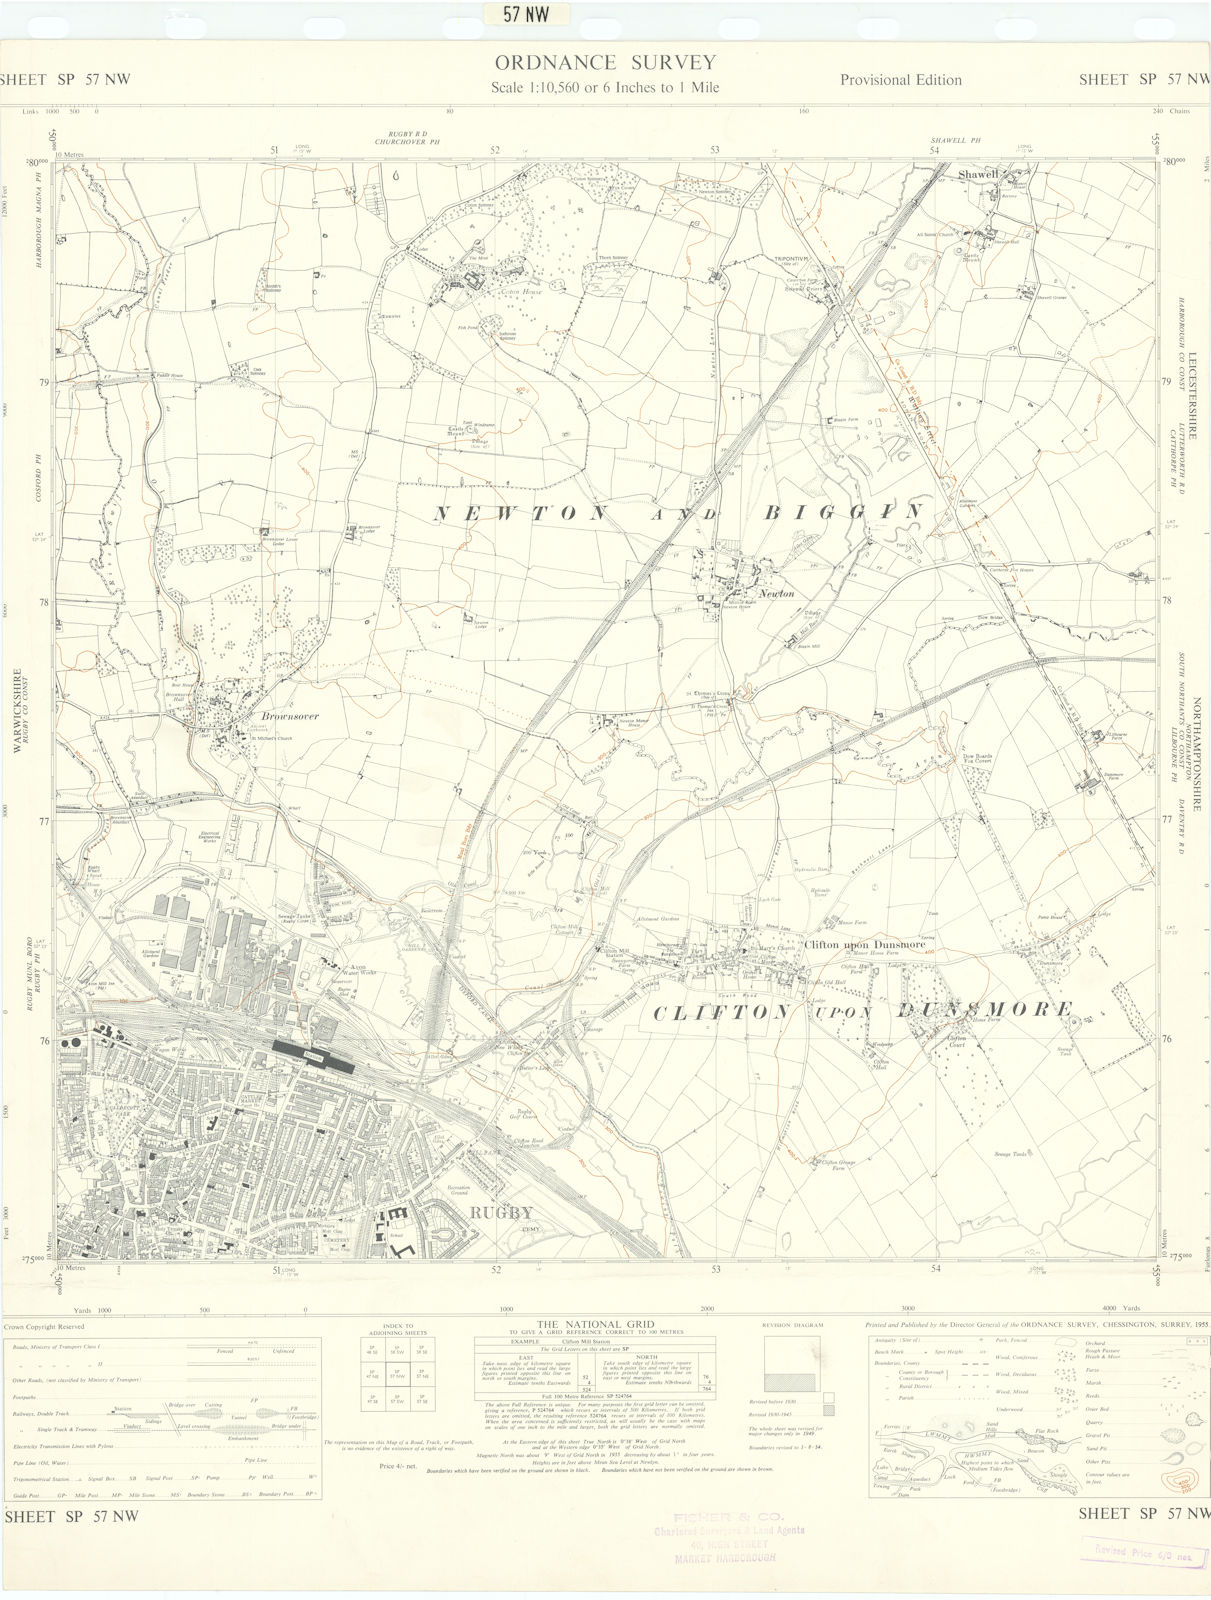 Ordnance Survey SP57NW Warwickshire Rugby Clifton upon Dunsmore Newton 1955 map